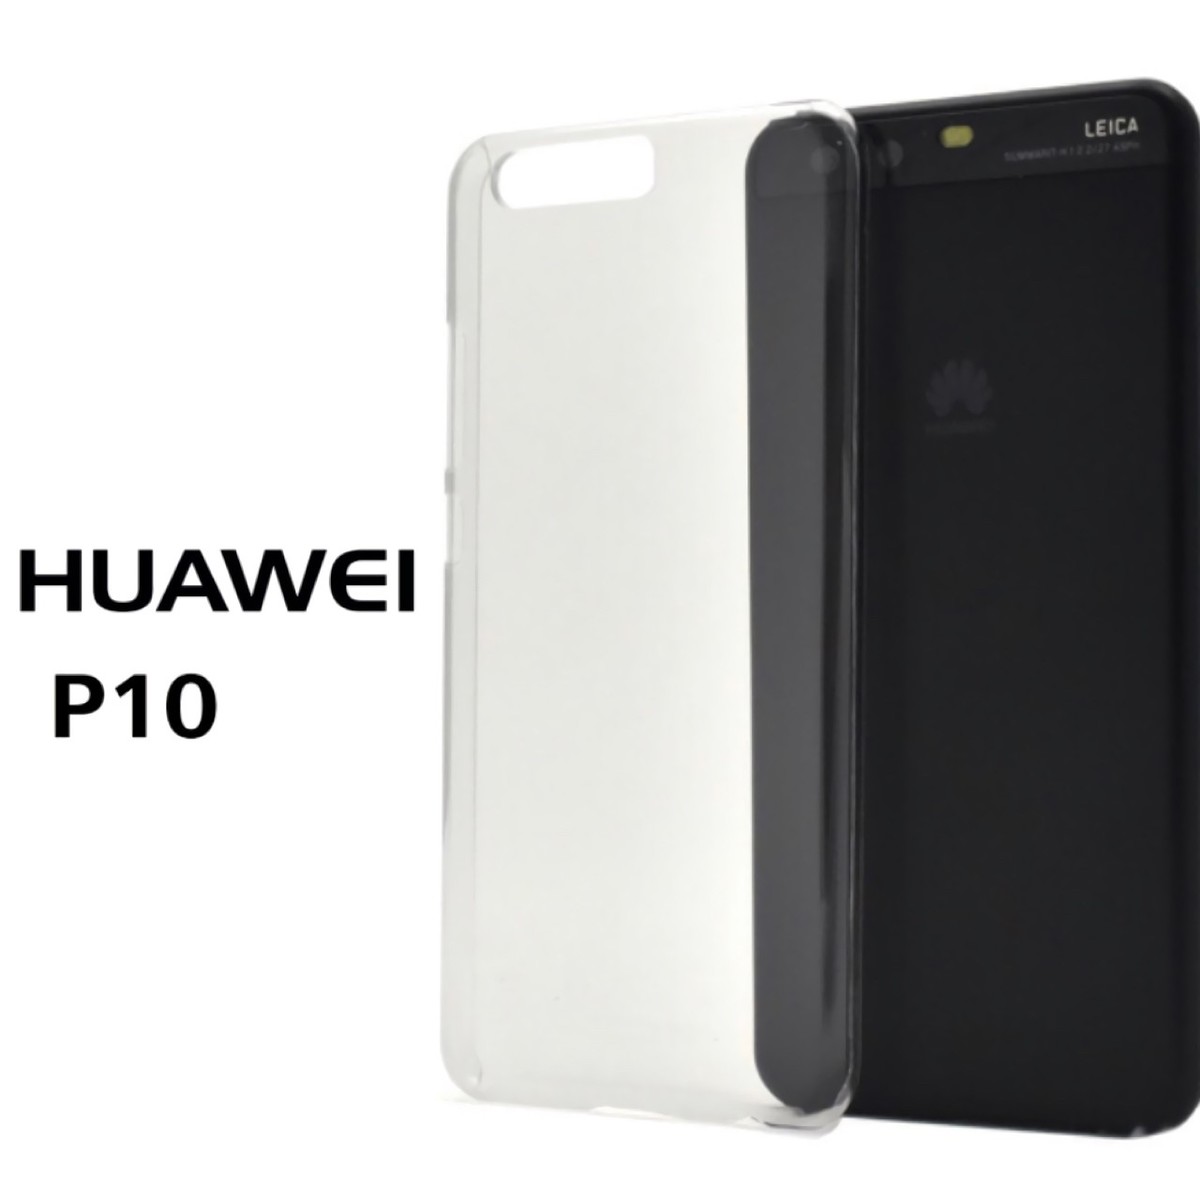 HUAWEI P10 ϡɥ եȥ ꥢ HUAWEIP10 եP10 P10 HUAWEI HUAWEIޥۥ ꥳ󥱡 P10С HUAWEIP10С androidޥ android androidСandroidP10 monopuri Υץ